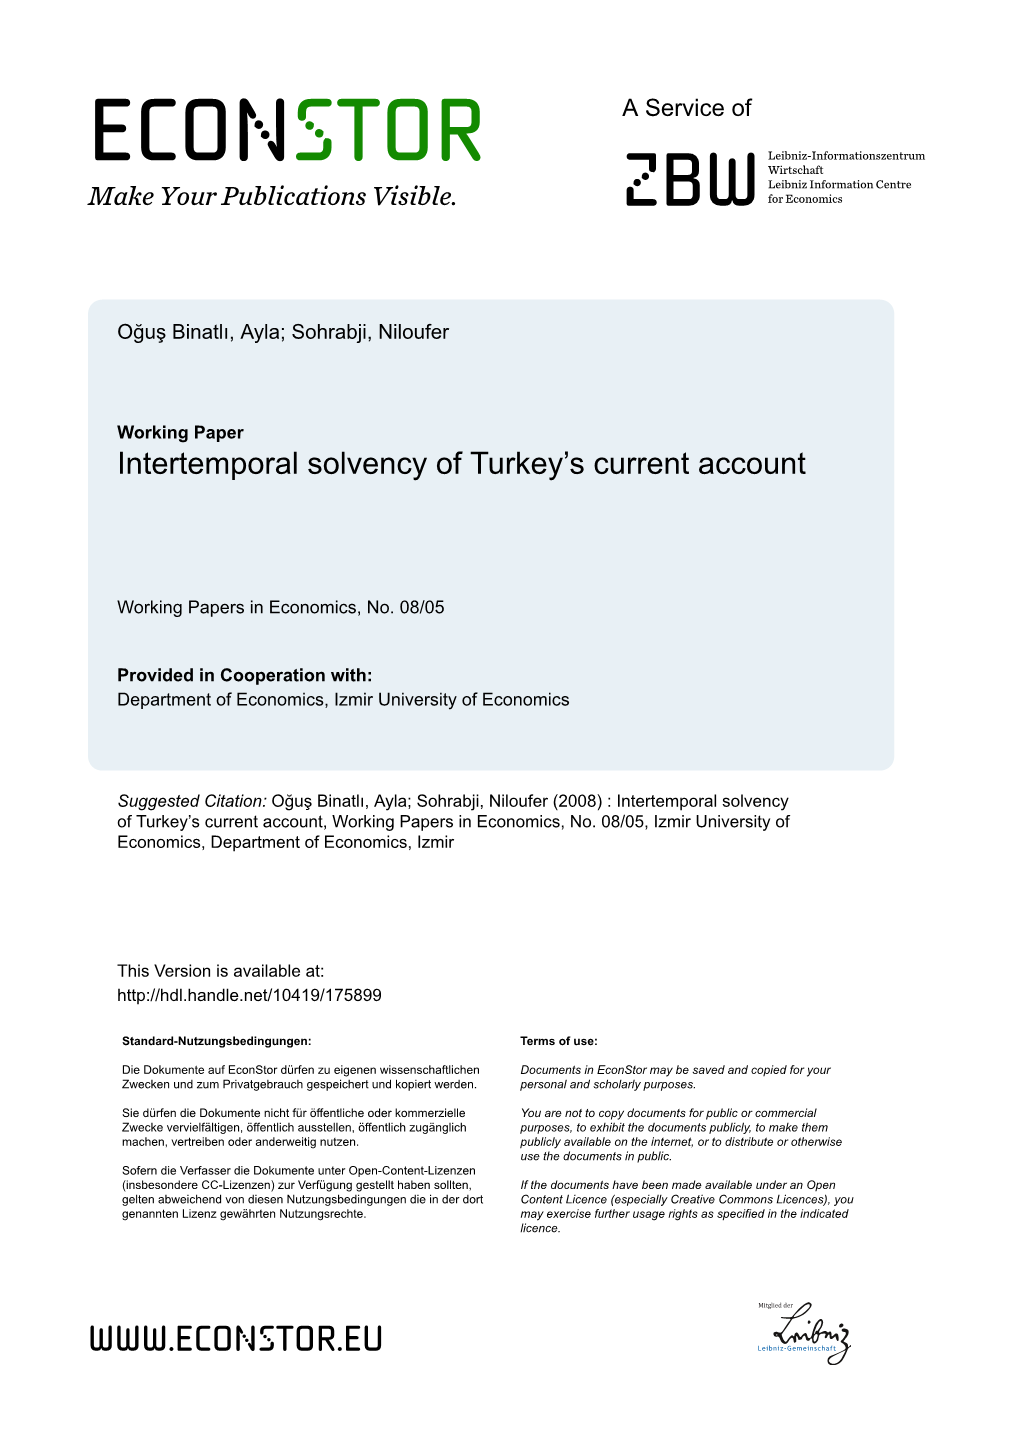 Intertemporal Solvency of Turkey's Current Account